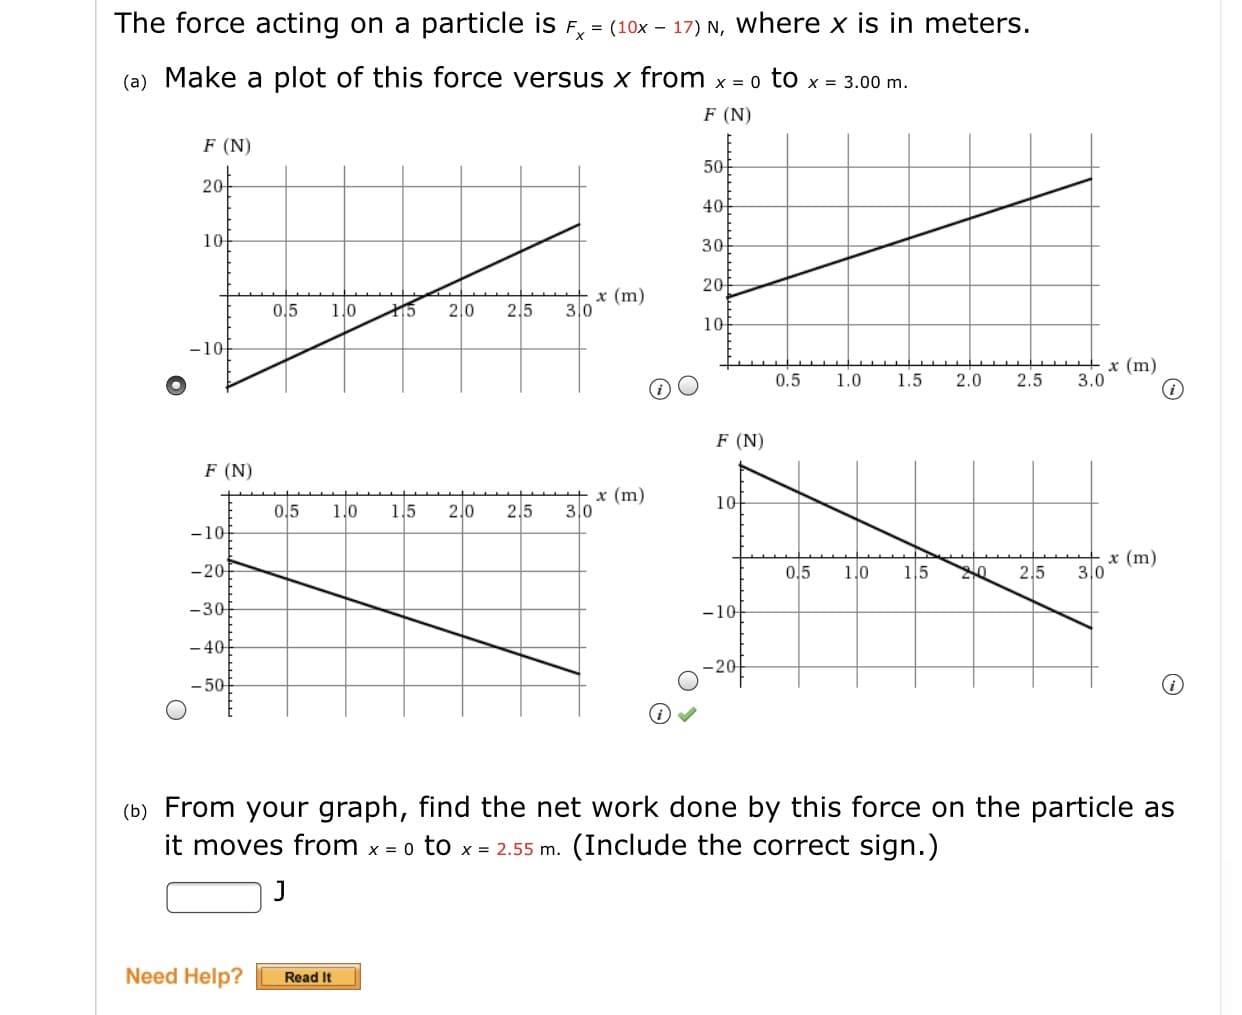 (b) From your graph, find the net work done by this force on the particle as
it moves from x = 0 to x = 2.55 m. (Include the correct sign.)
